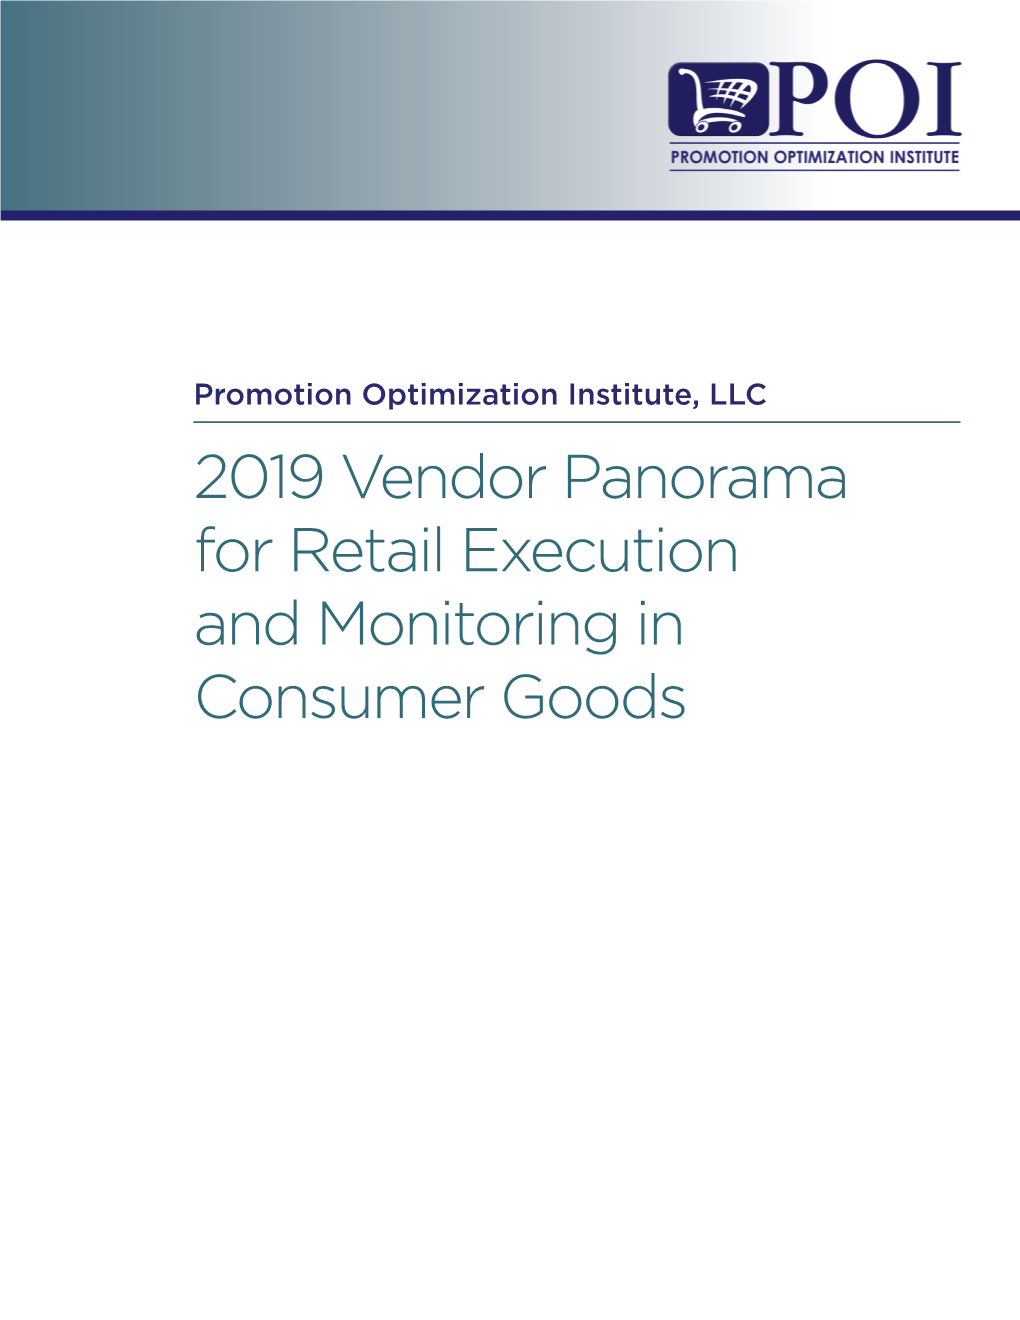 2019 Vendor Panorama for Retail Execution and Monitoring in Consumer Goods Vendor Panorama for Retail Execution and Monitoring in Consumer Goods 2018